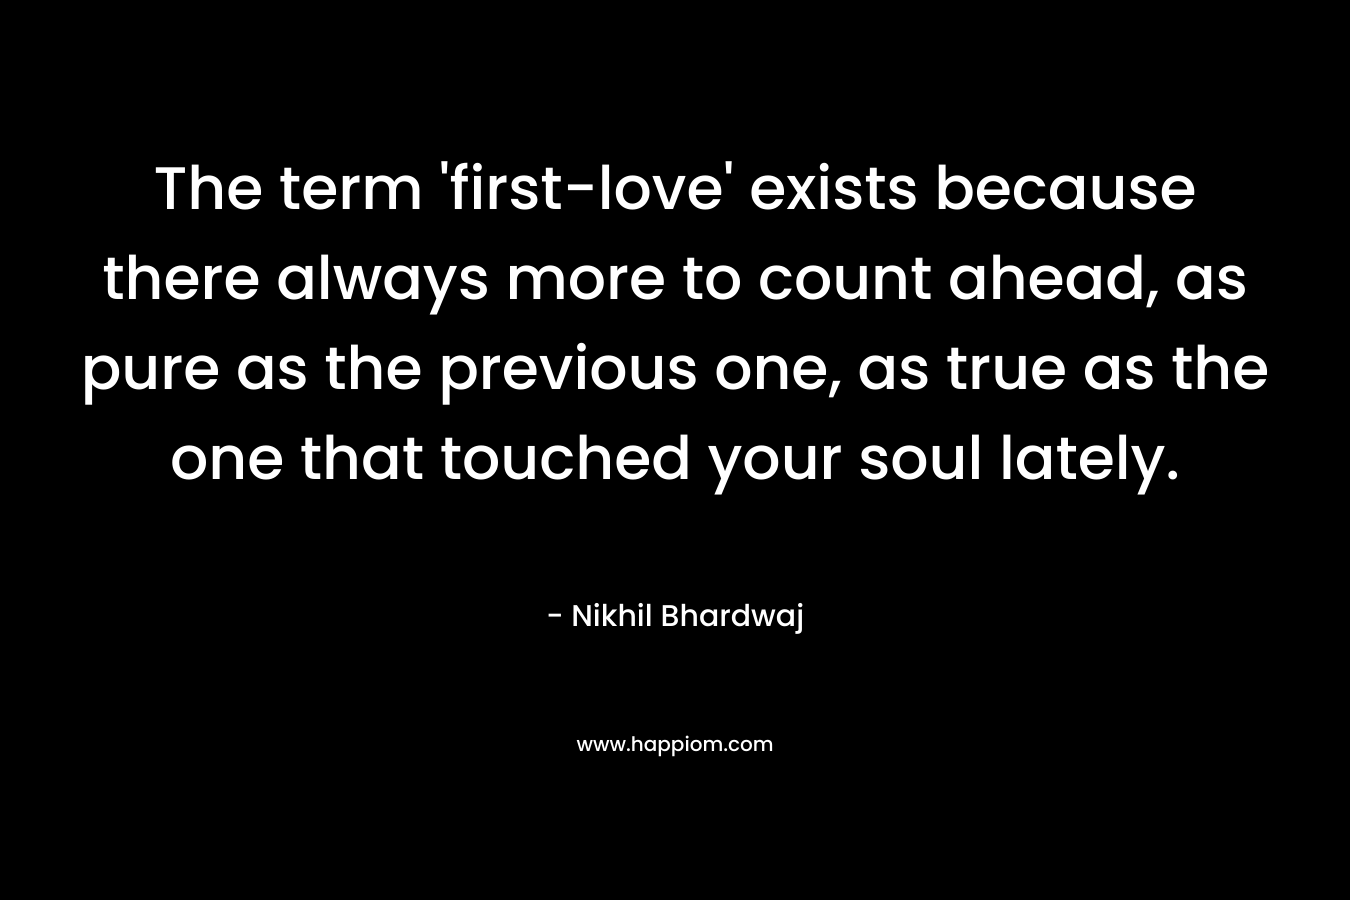 The term ‘first-love’ exists because there always more to count ahead, as pure as the previous one, as true as the one that touched your soul lately. – Nikhil Bhardwaj